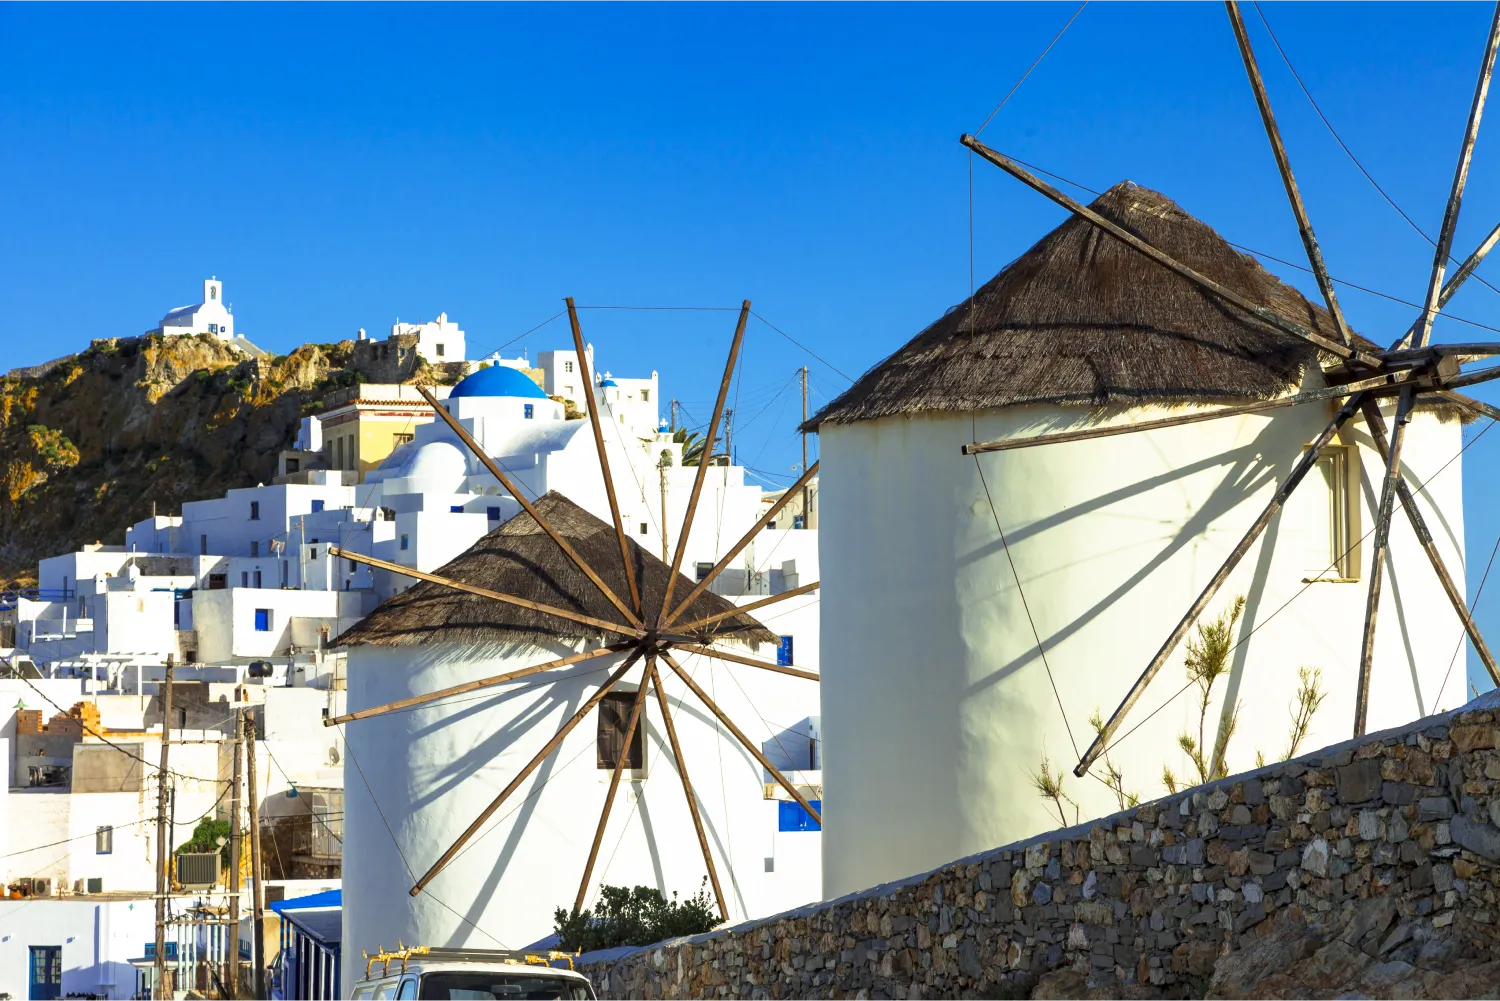 The windmills of Serifos and Chora in the background